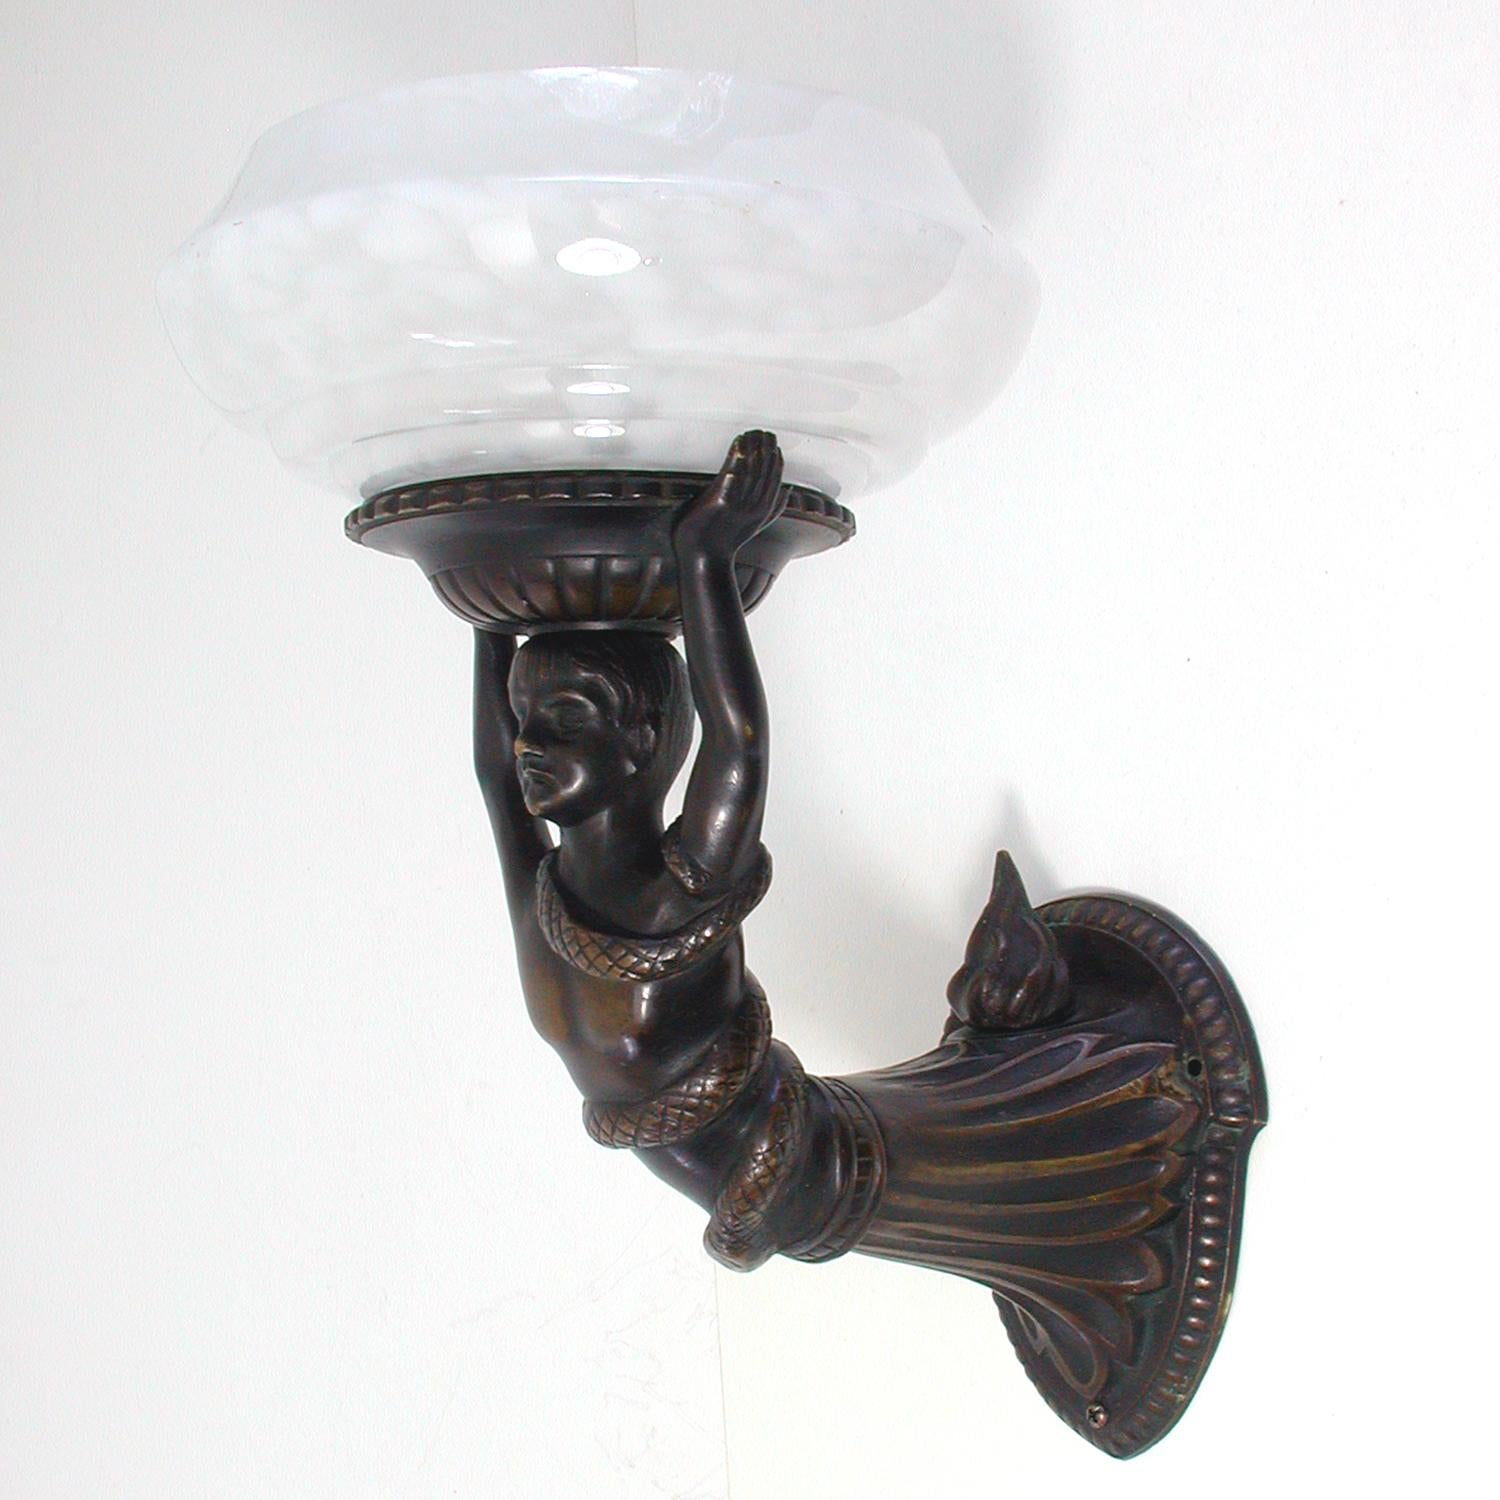 This unusual bronze wall light was designed and manufactured in France in the early 1920s. It features a lady with a snake winding around her body and her holding a mottled glass lamp shade above her head.

The lamp has got a French B22 socket and